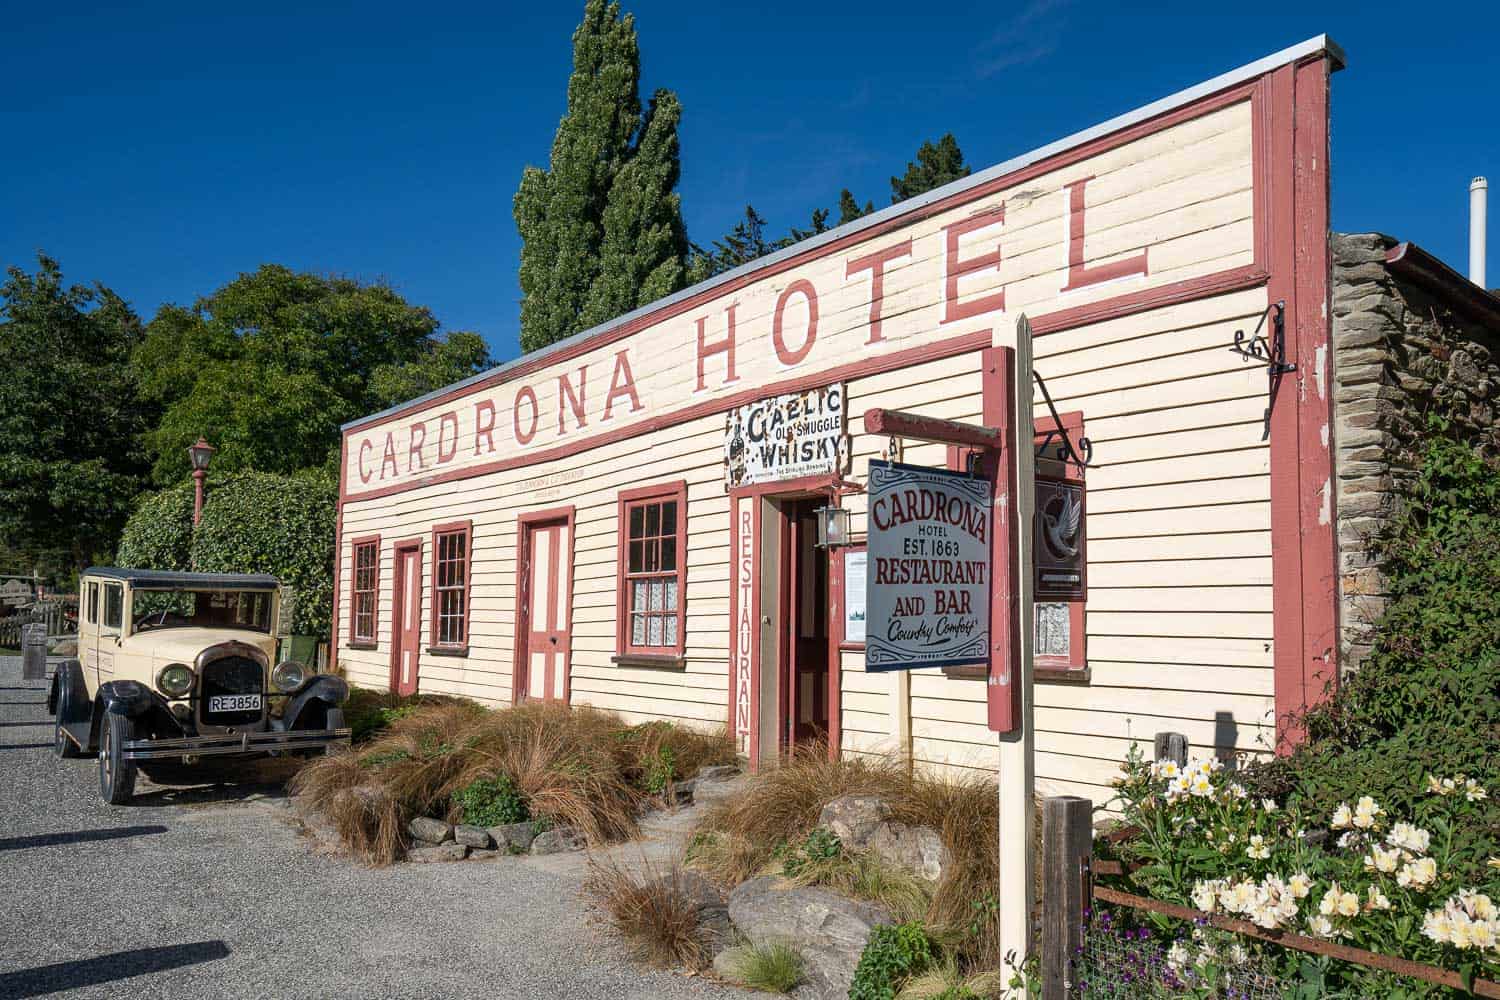 Cardrona Hotel, one of the oldest pubs in New Zealand